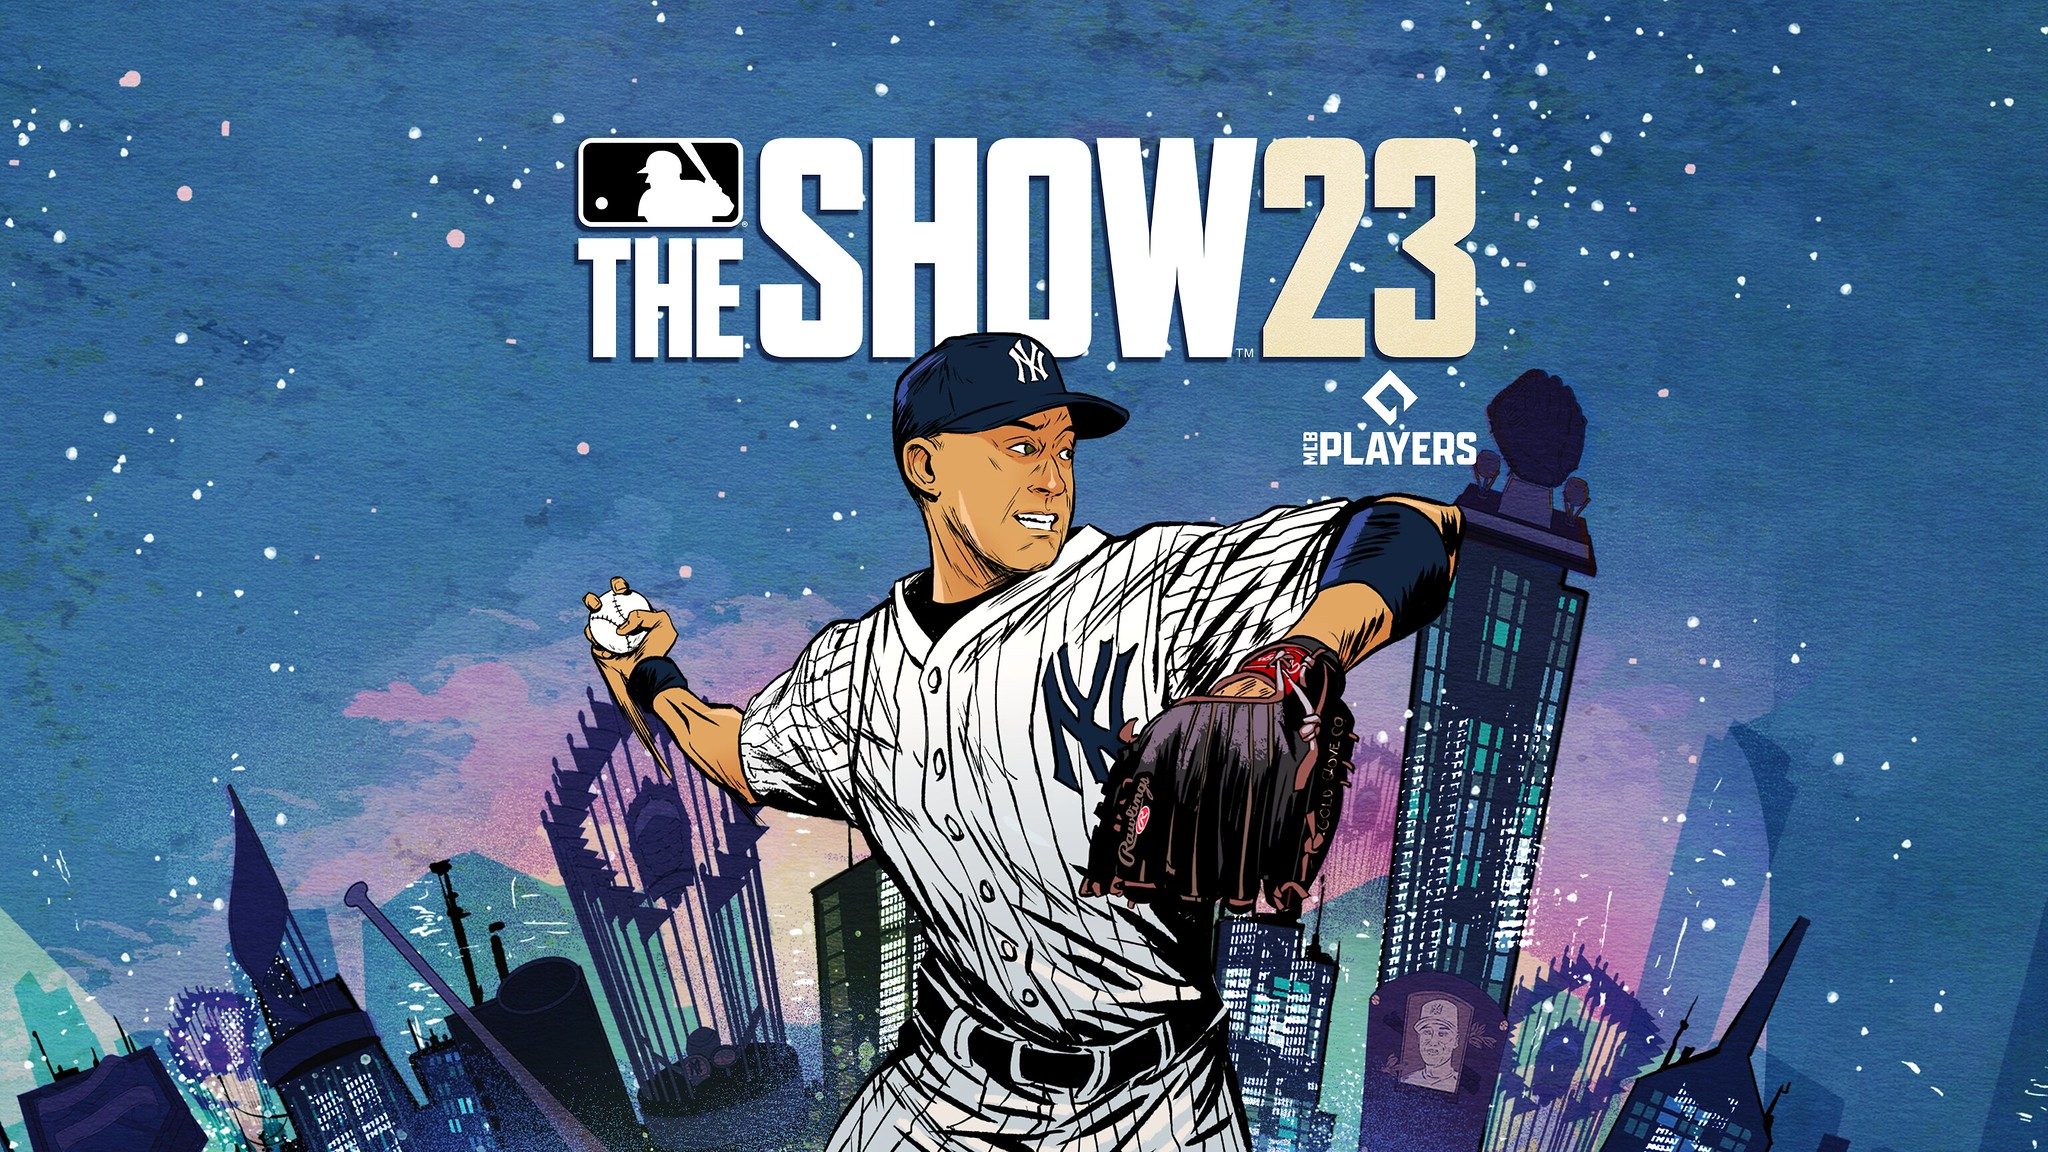 Yankees legend Derek Jeter is your MLB The Show 23 Collector’s Edition cover athlete